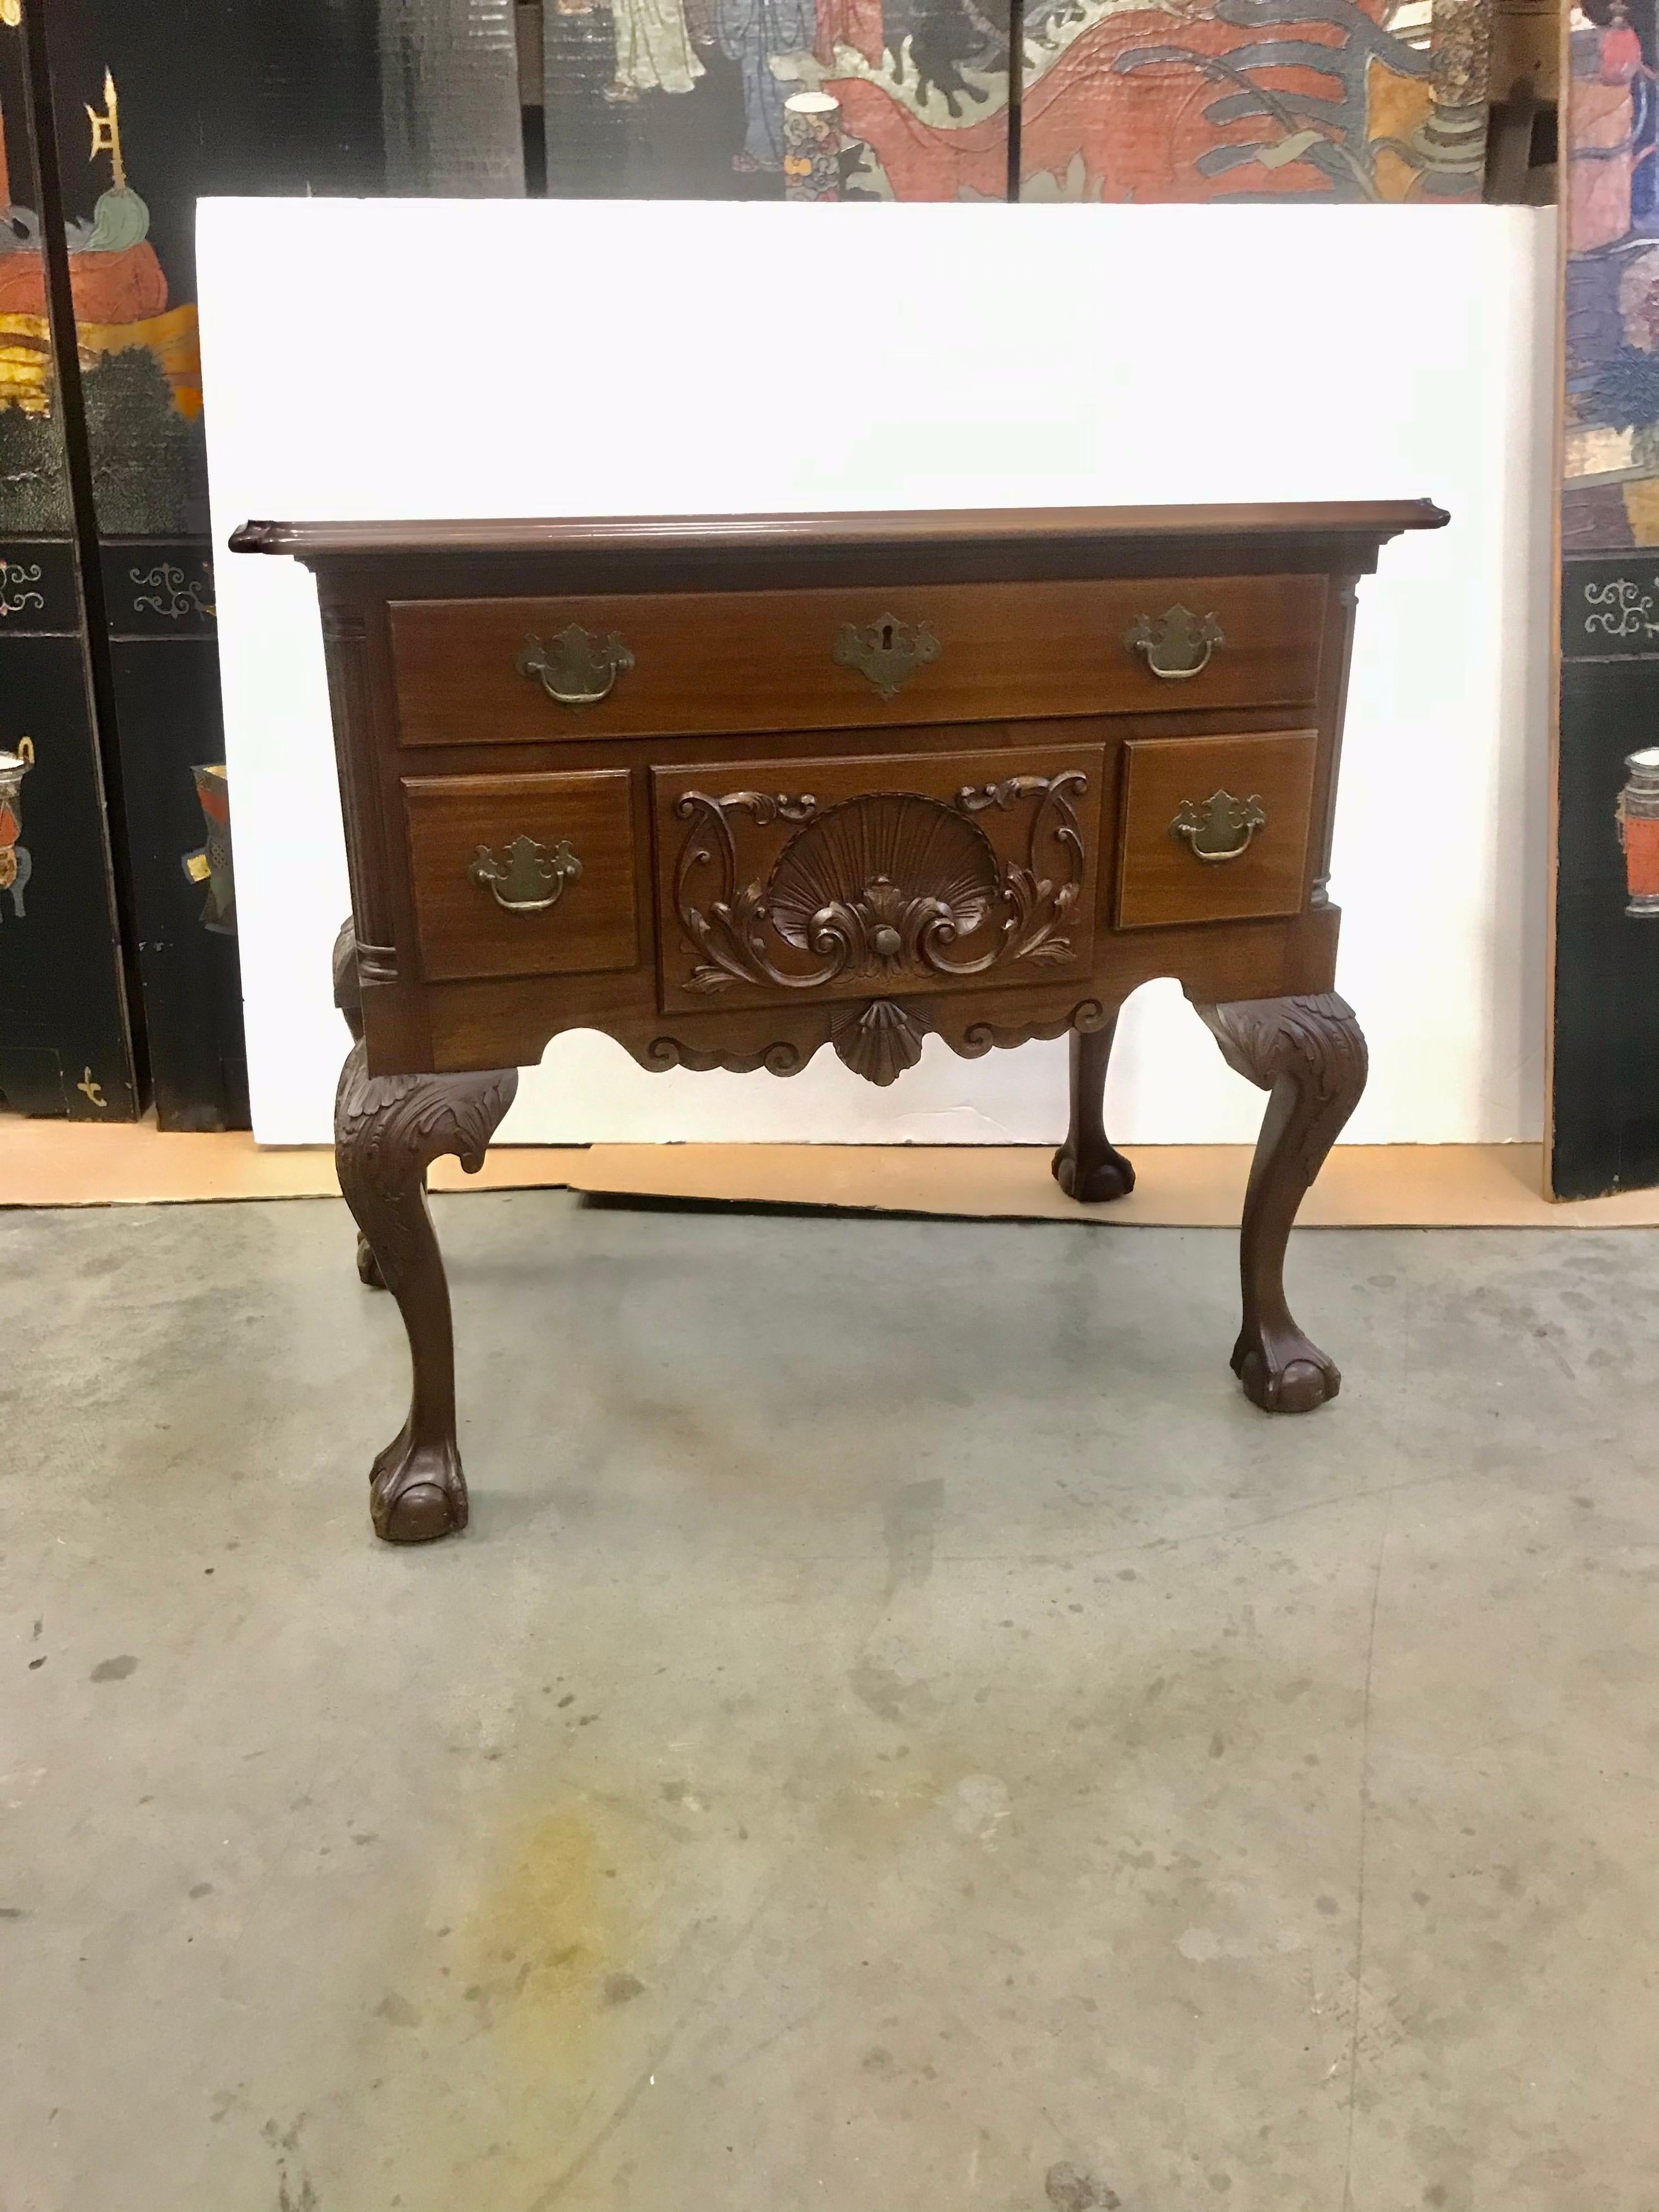 An early 20th century hand carved mahogany Philadelphia Chippendale style lowboy. The larger top drawer with three lower smaller drawers with shell carving in the center one. The legs beautifully carved with acanthus leaves resting on classic ball